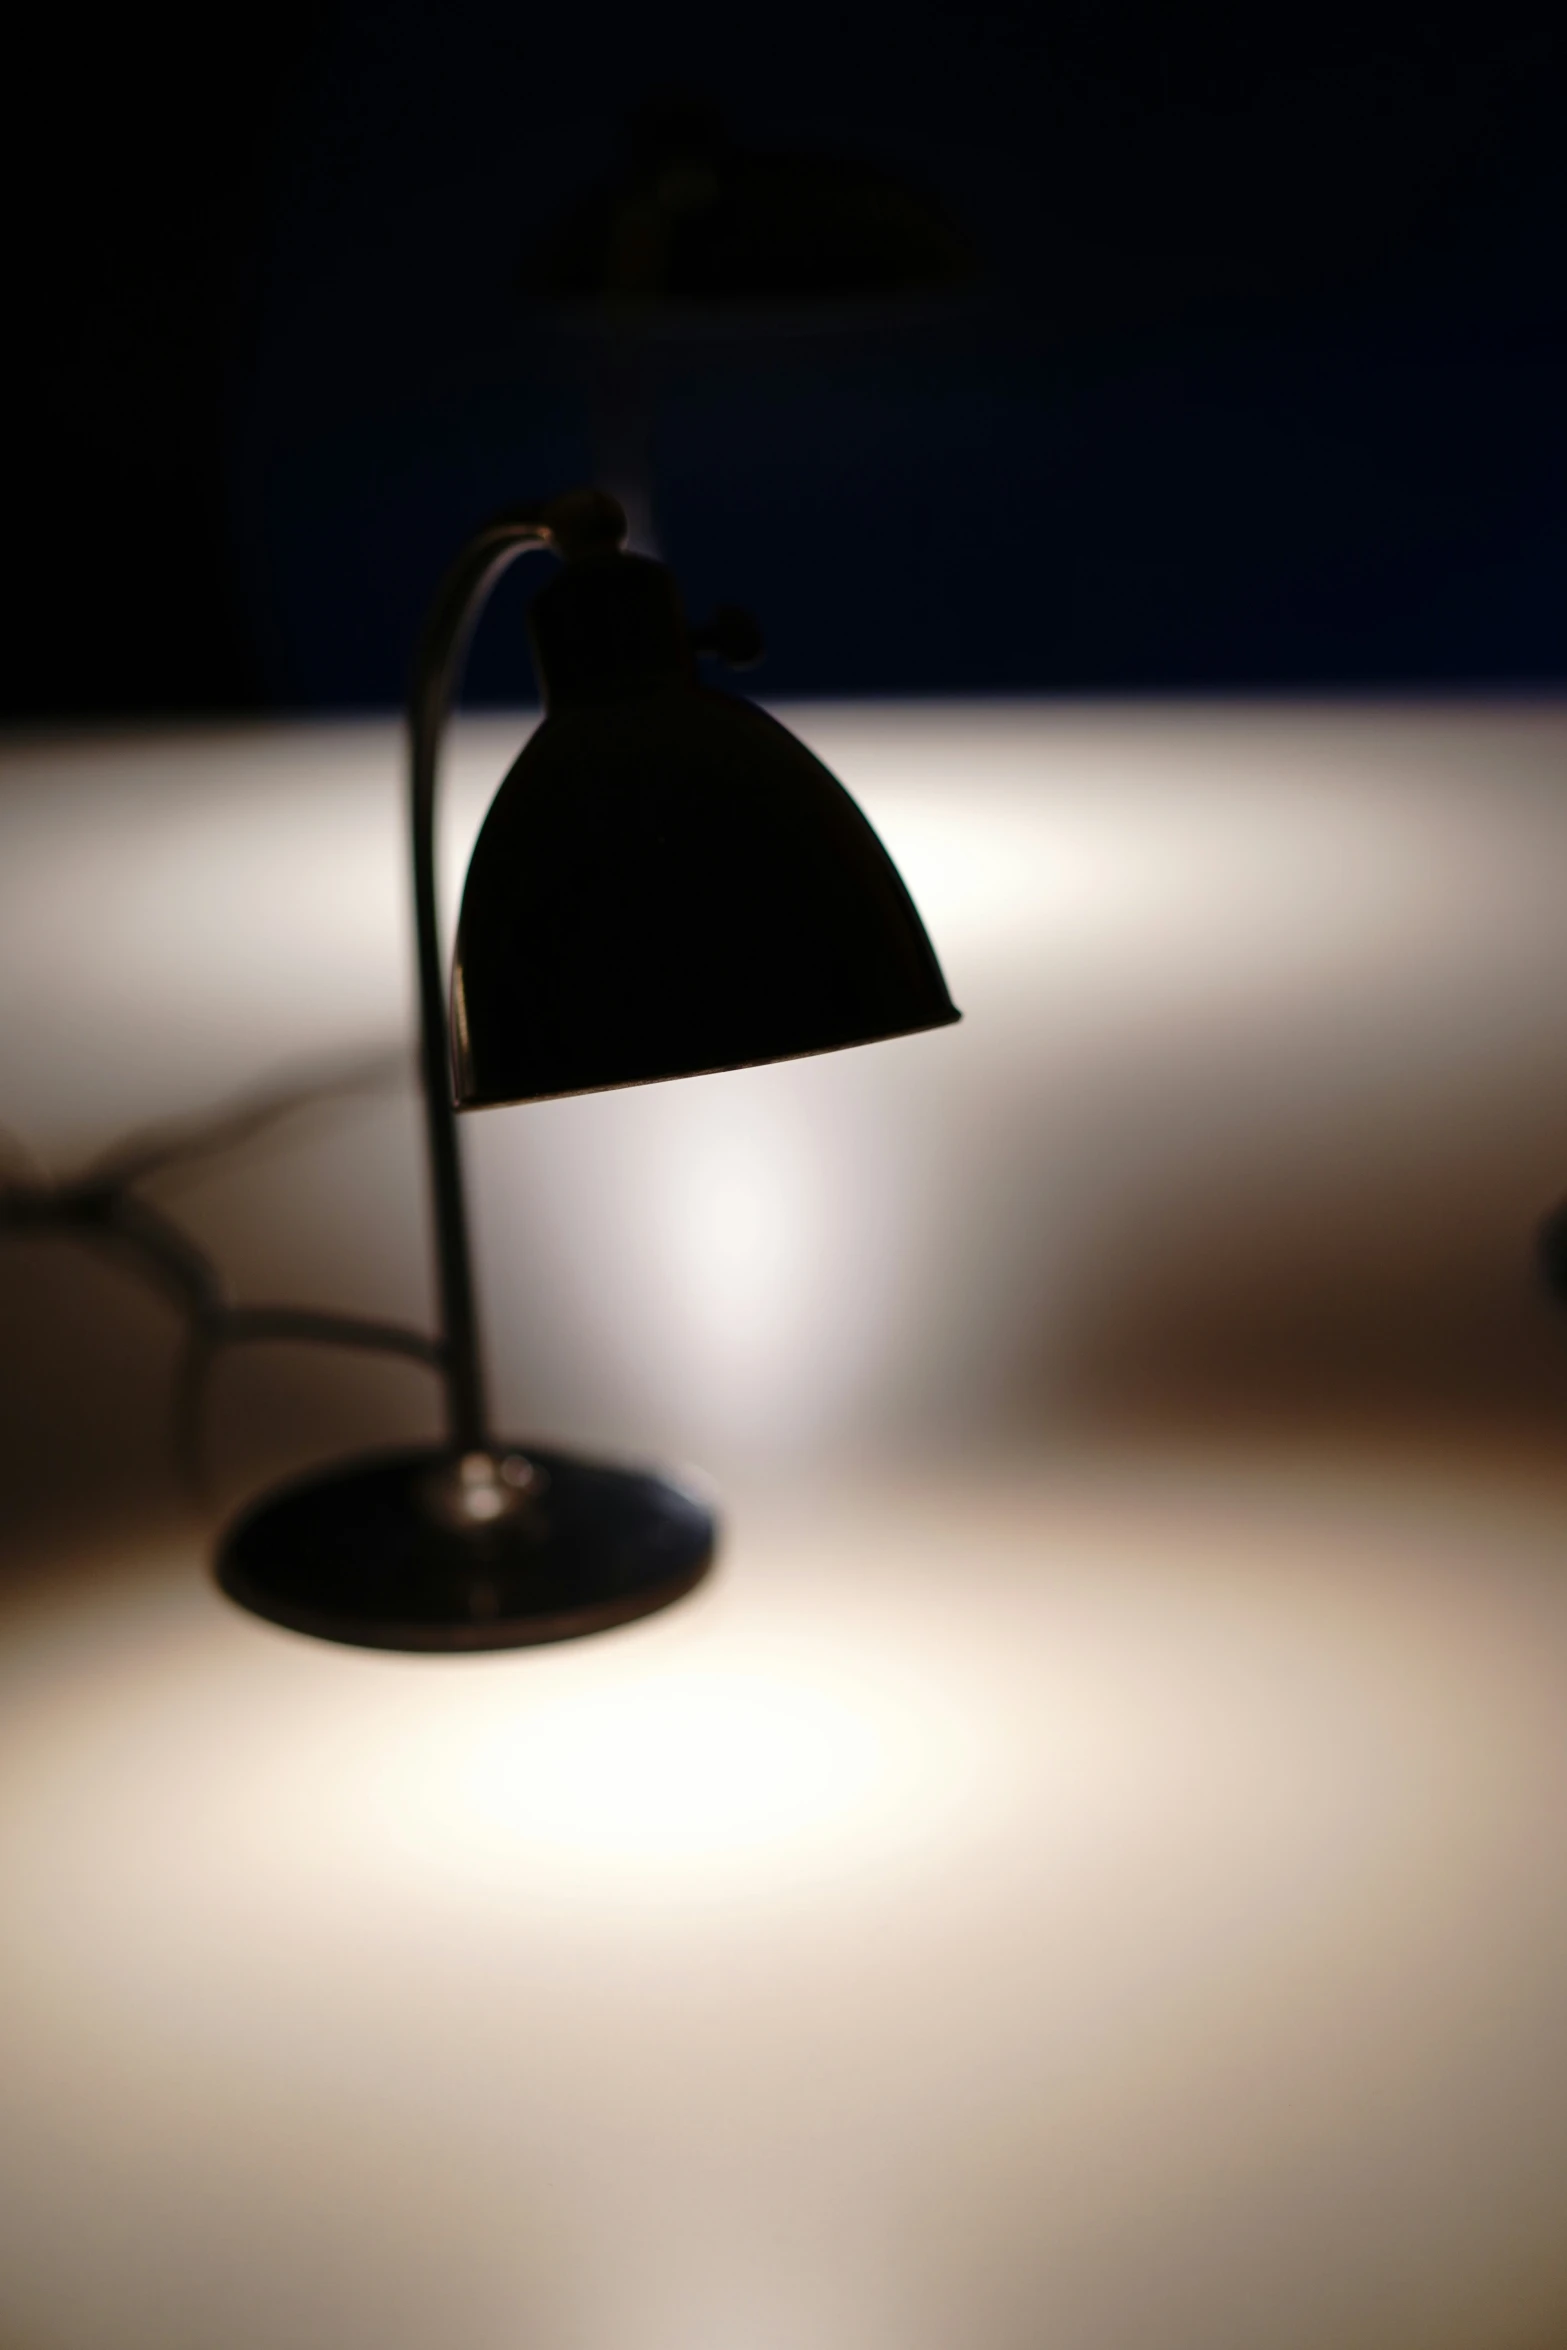 the dim light of a table lamp shines brightly on the surface